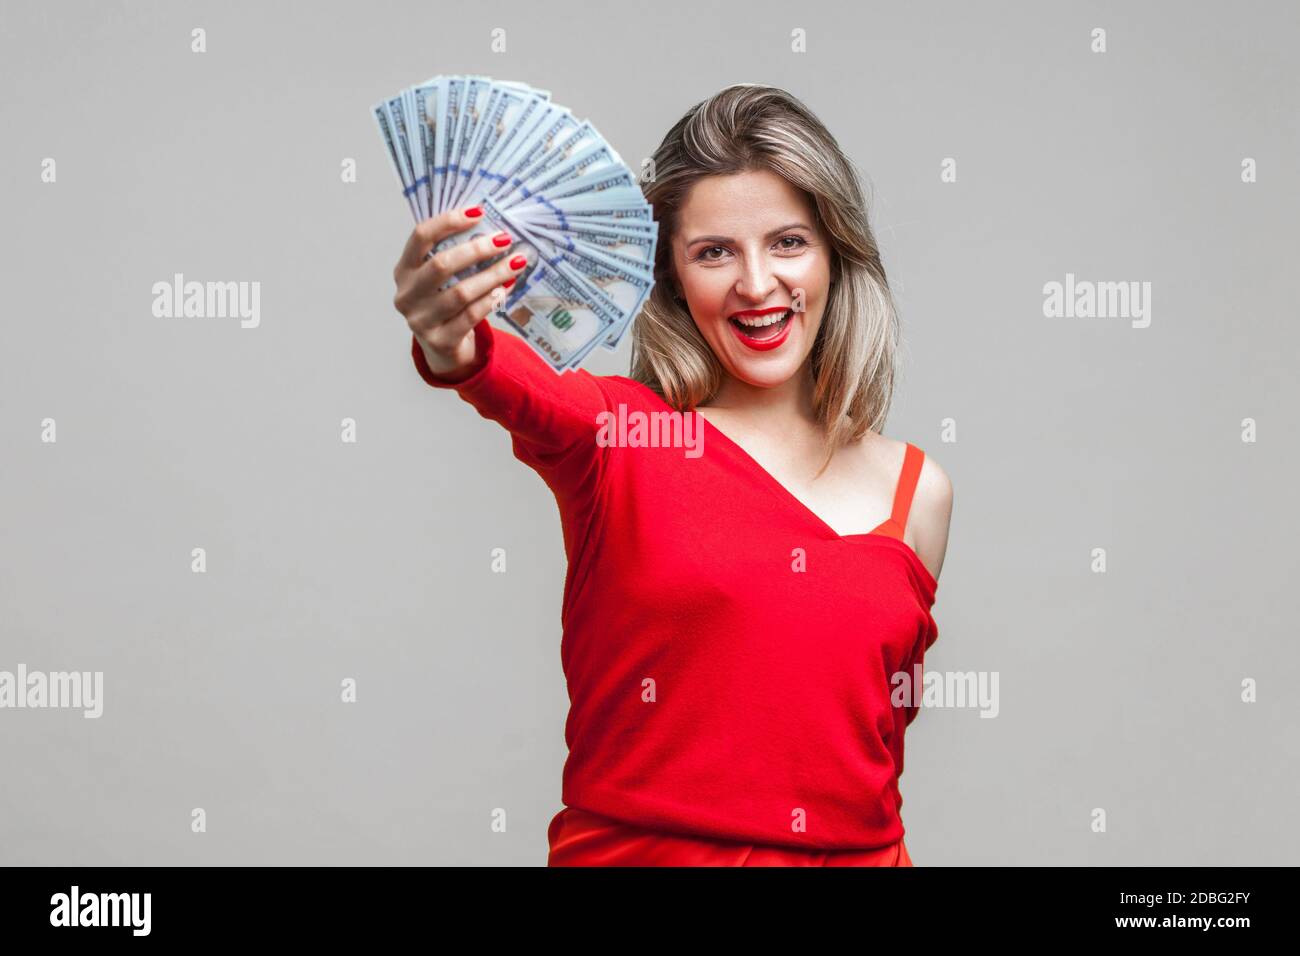 Portrait Of Excited Rich Beautiful Woman In Red Dress Standing Showing Dollar Bills To Camera